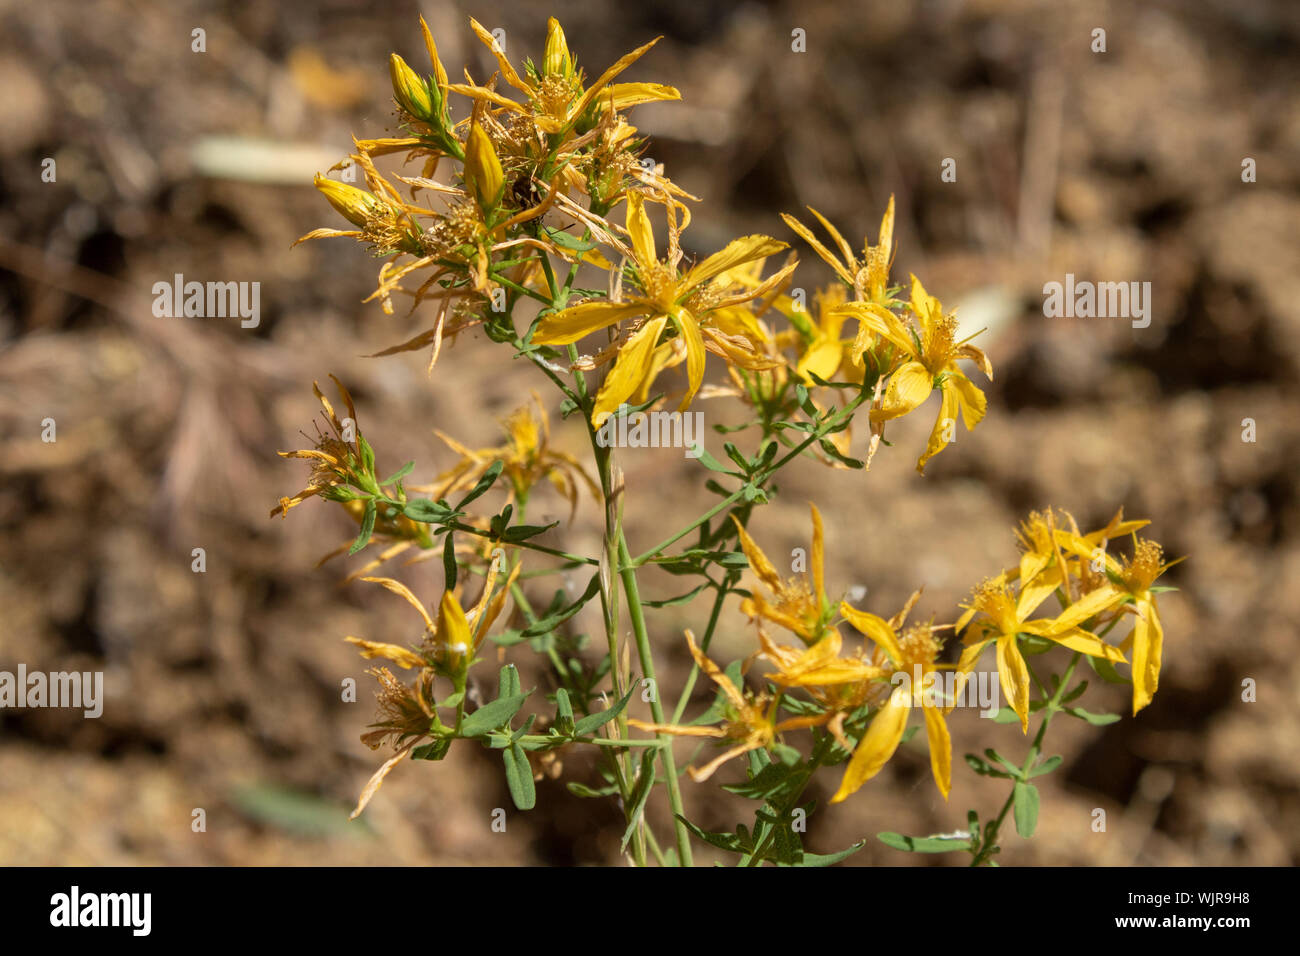 Close-up shot of Asphodeline liburnica flower. The leaves are yellow. Taken in the woods. Stock Photo